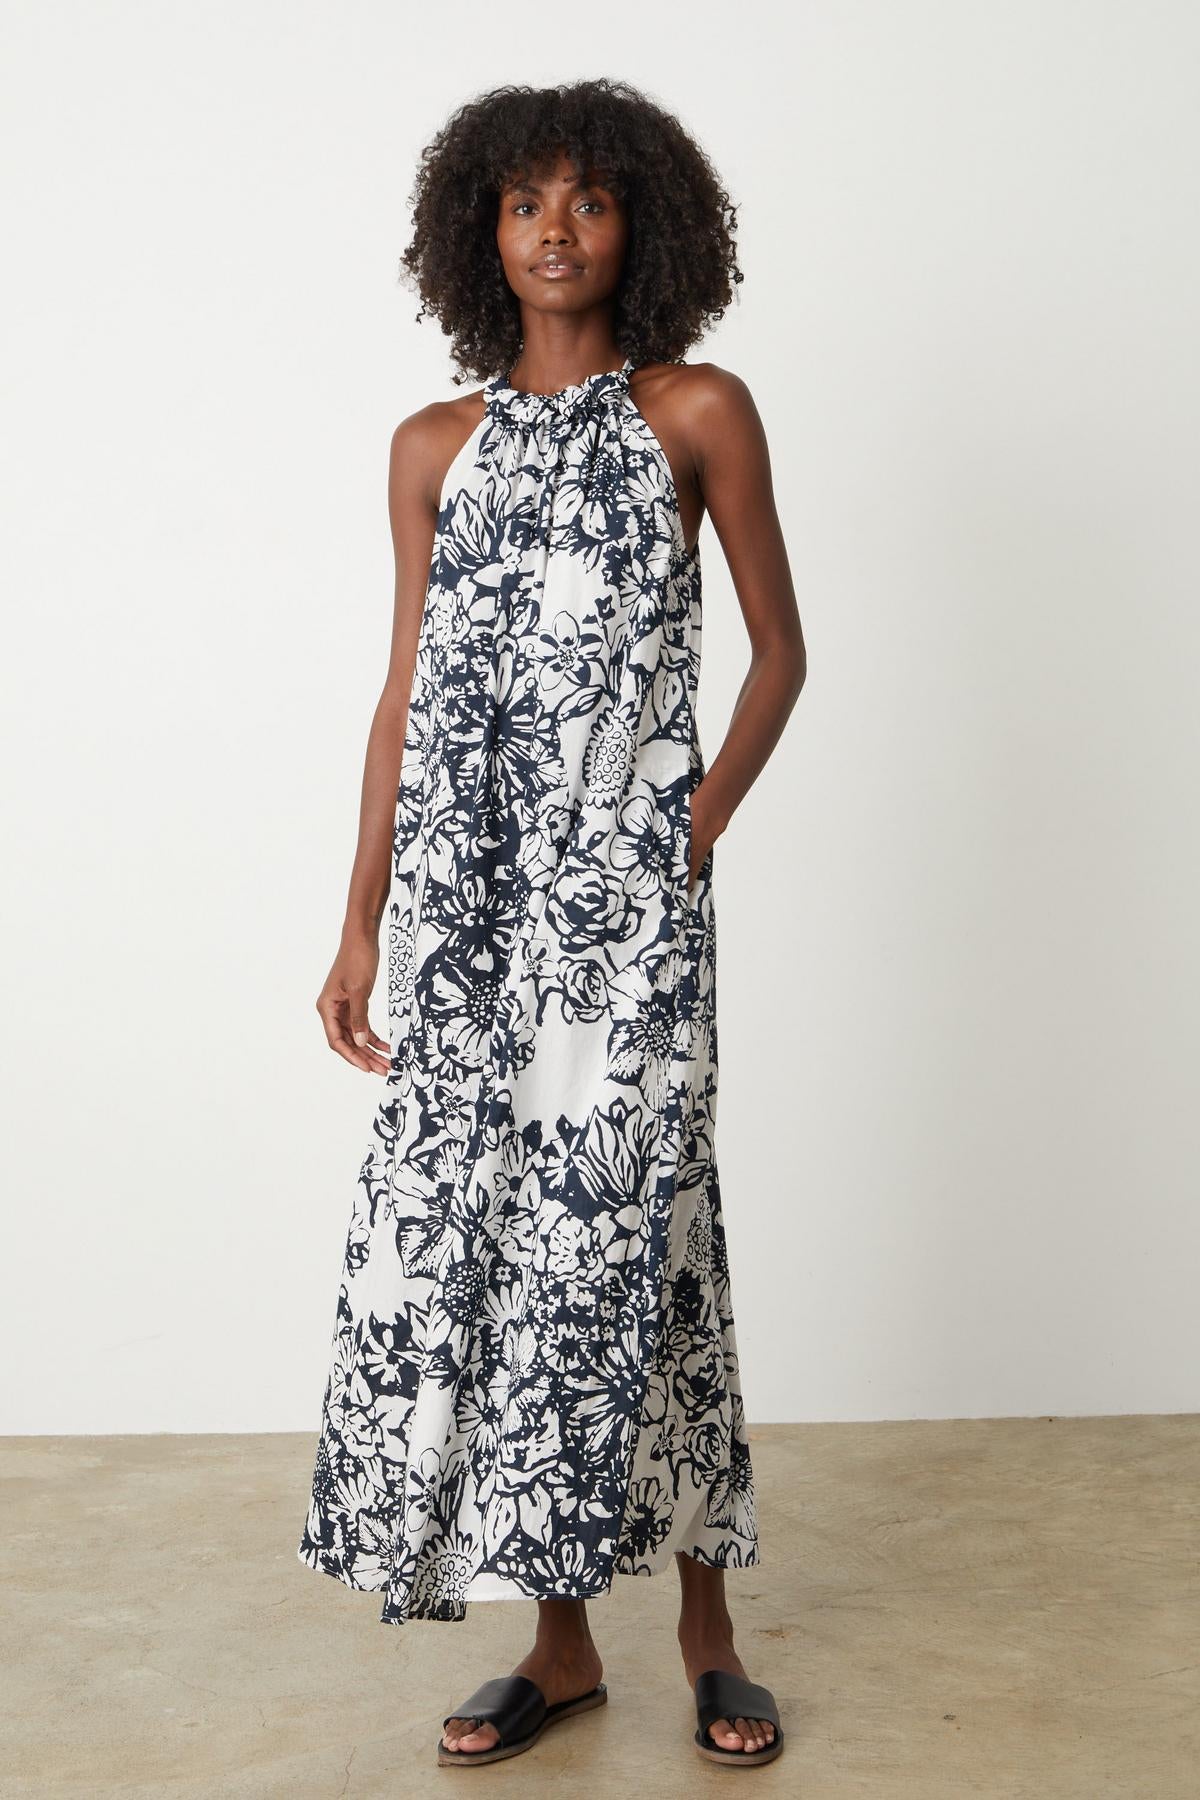 A woman wearing the Velvet by Graham & Spencer Penelope Printed Maxi Dress.-26757320769729